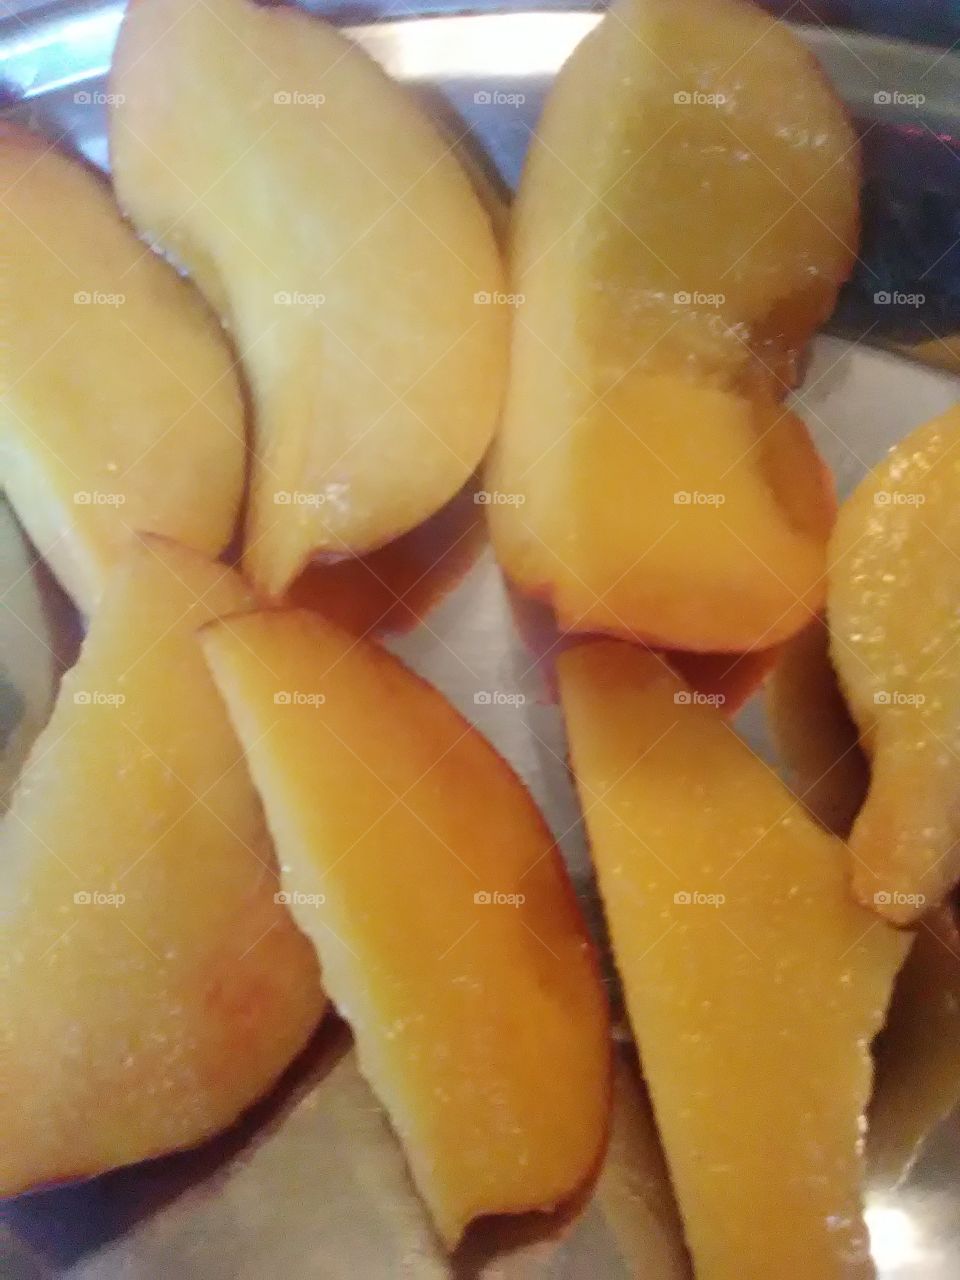 golden  peach slices soooo delicious and sweet .